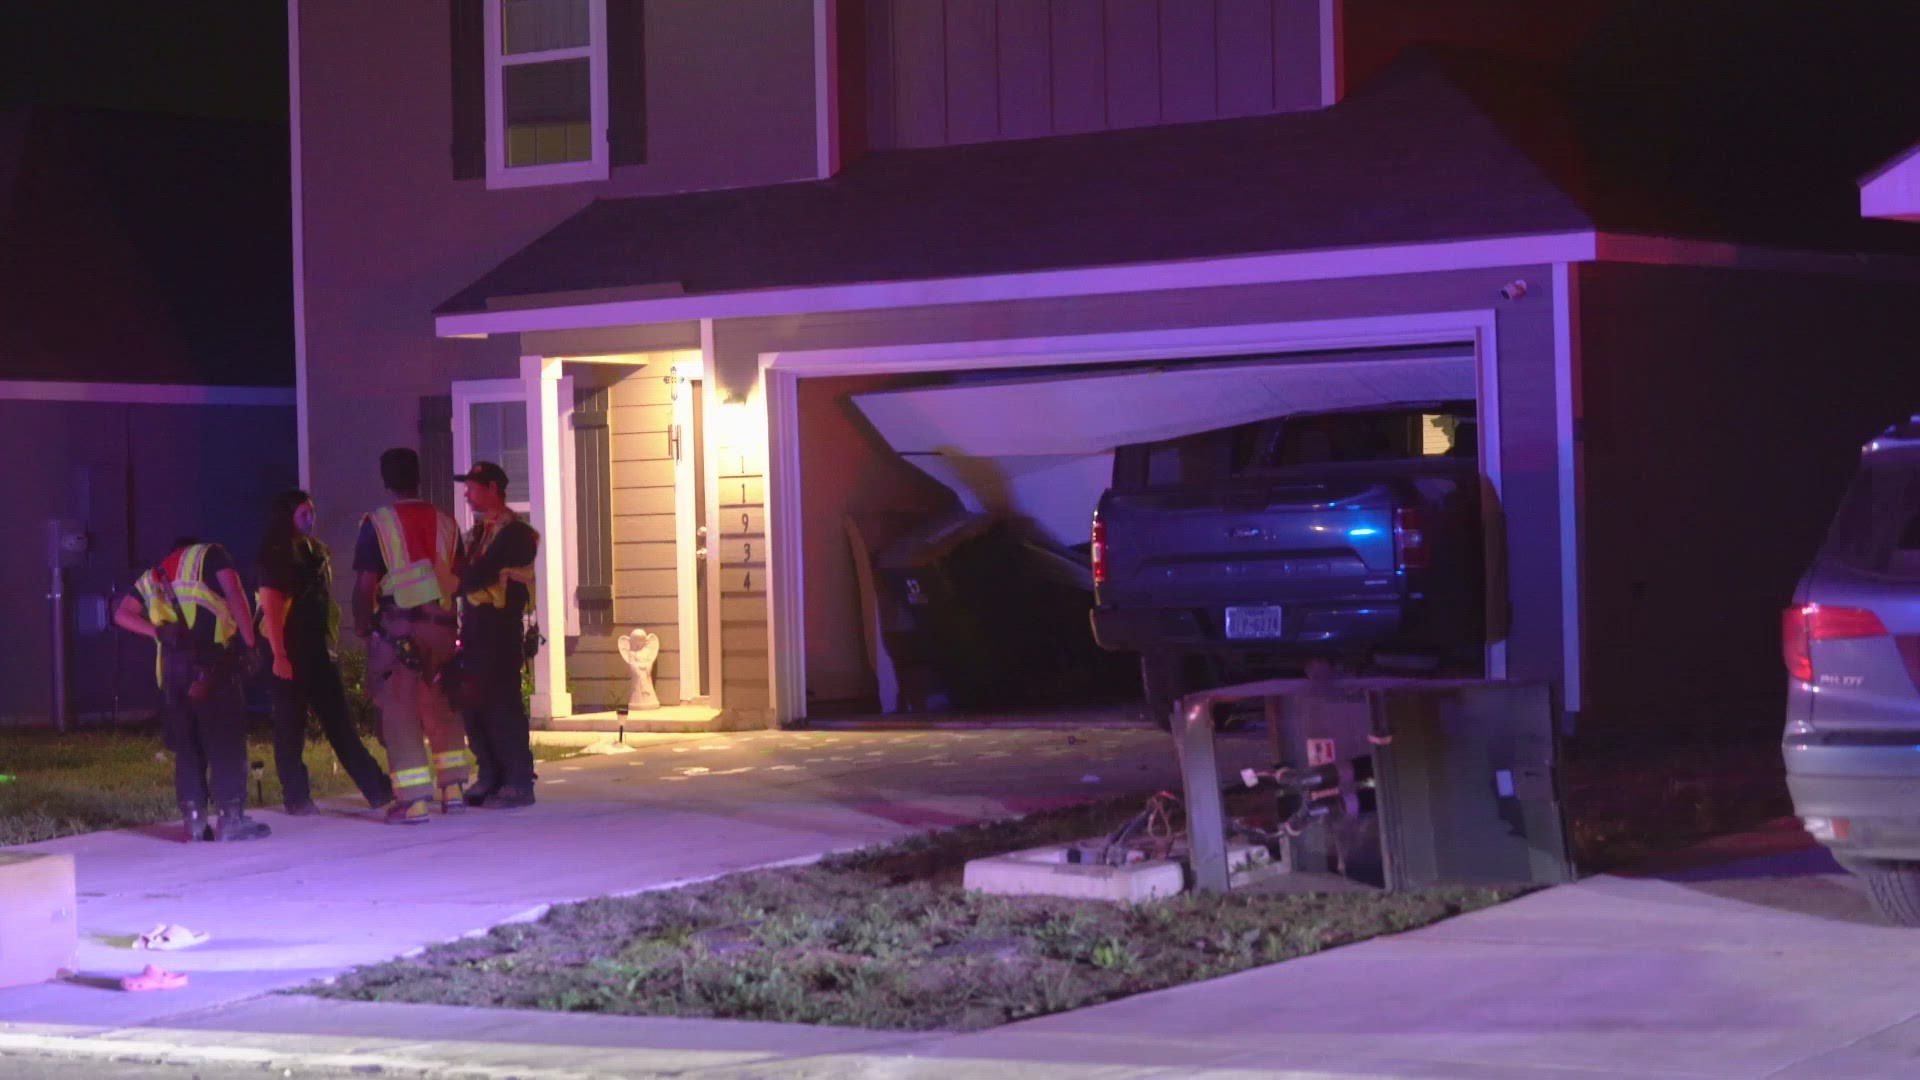 Police say the driver told them she made the turn too fast and ended up crashing into the home.